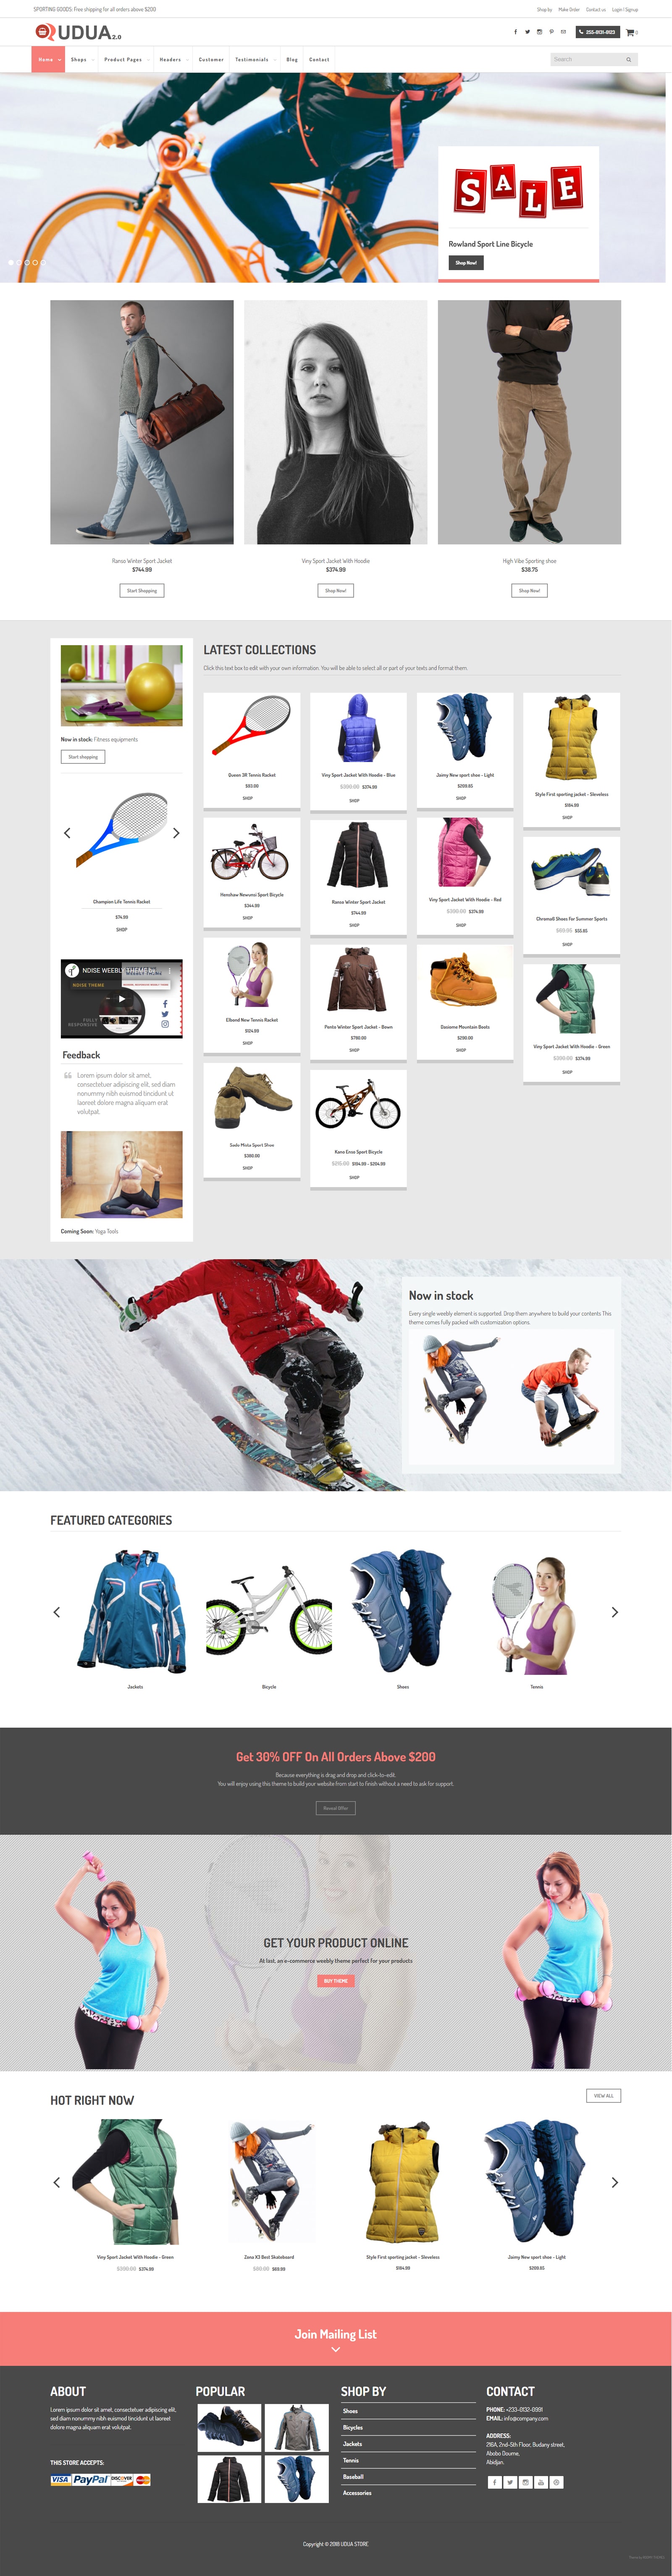 weebly store templates - udua theme